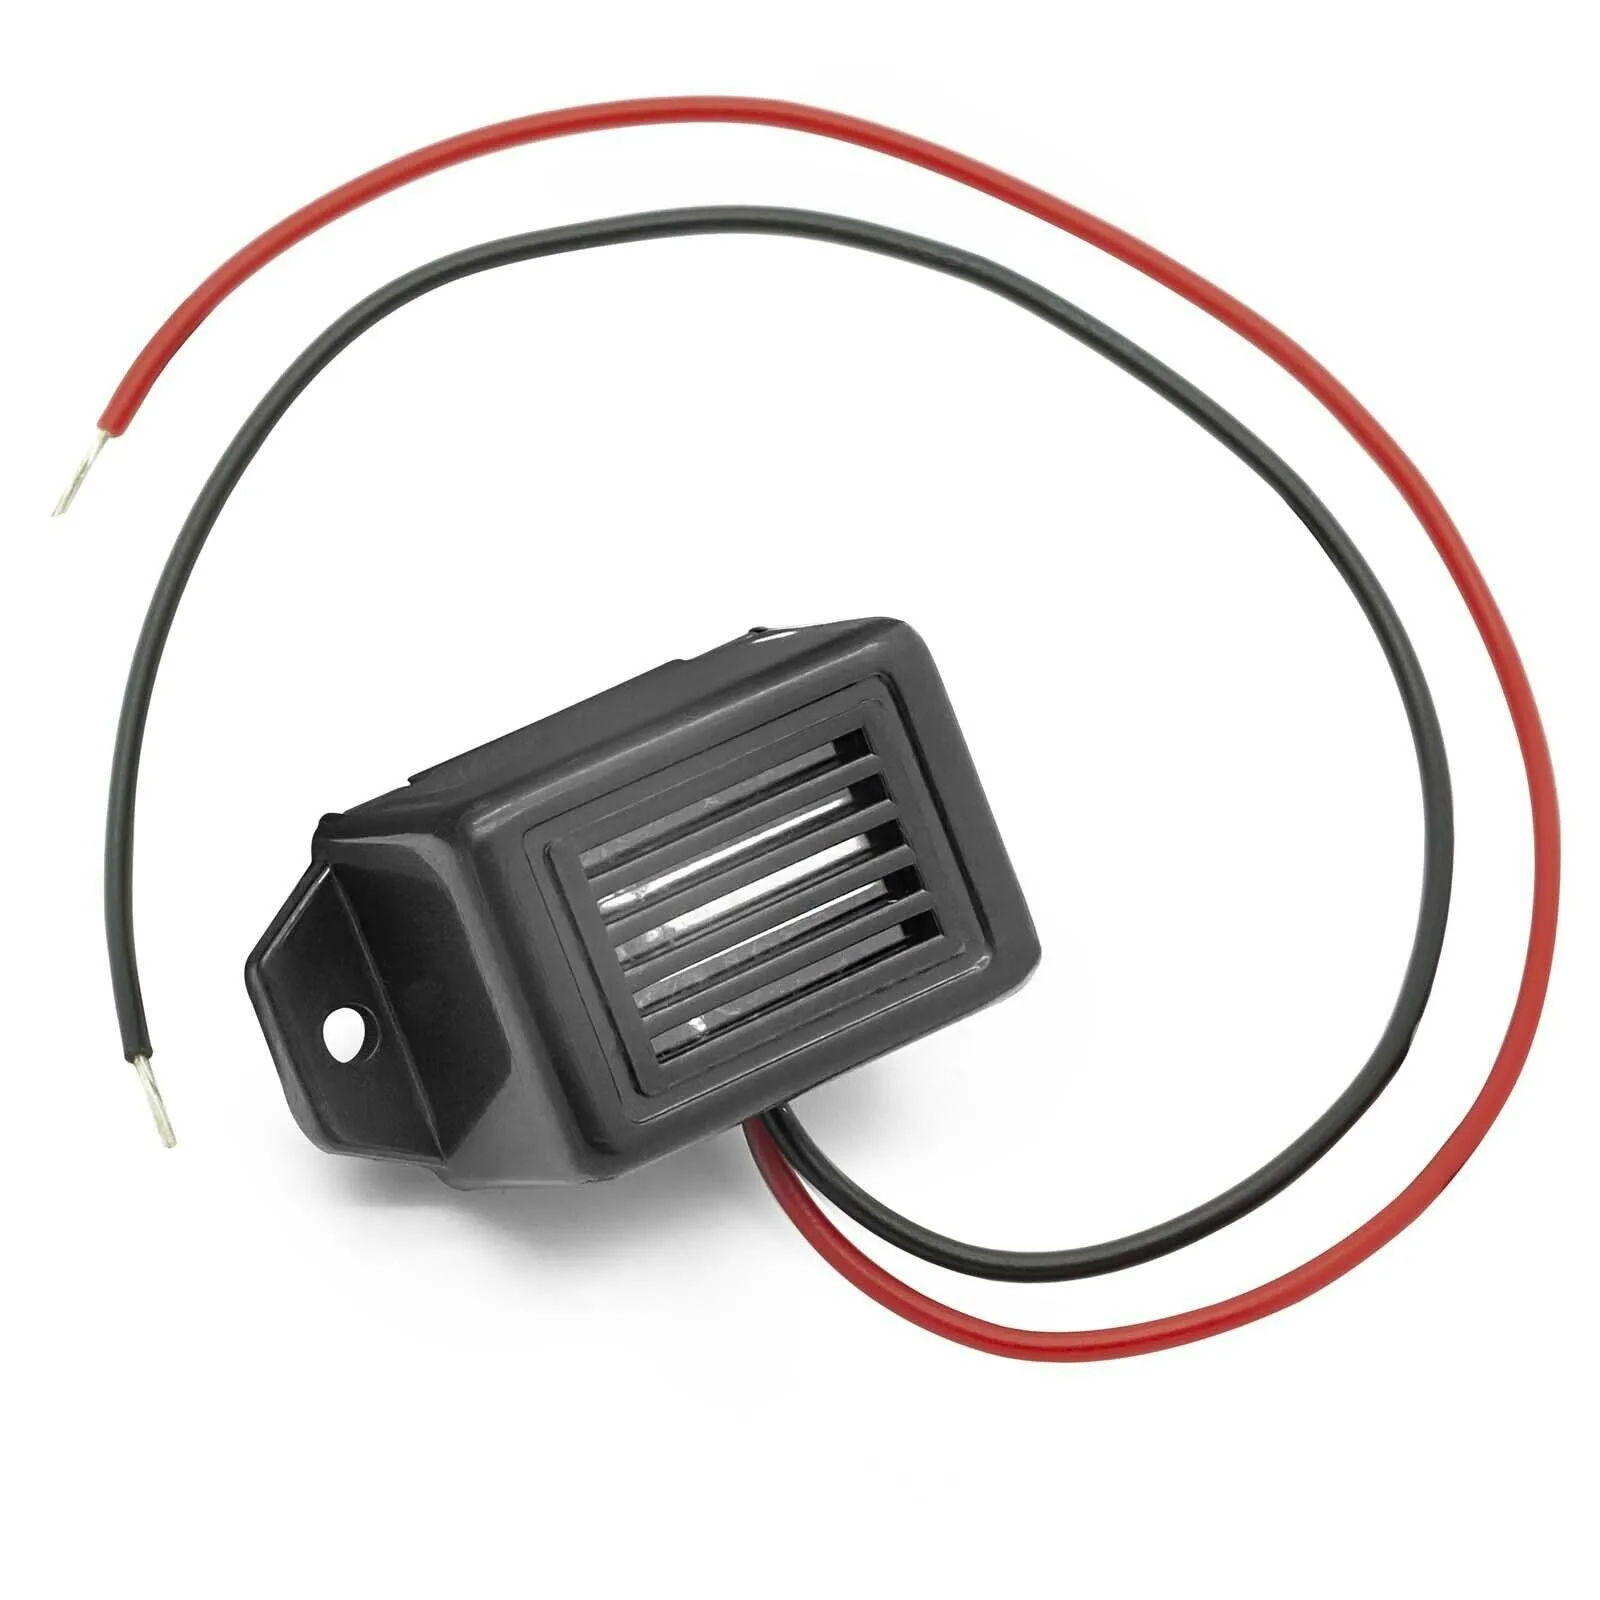 

Car Light Off Warner Control Buzzer Beeper 12V Adapter Cable Auto Light-off Warning System Accessory Tool